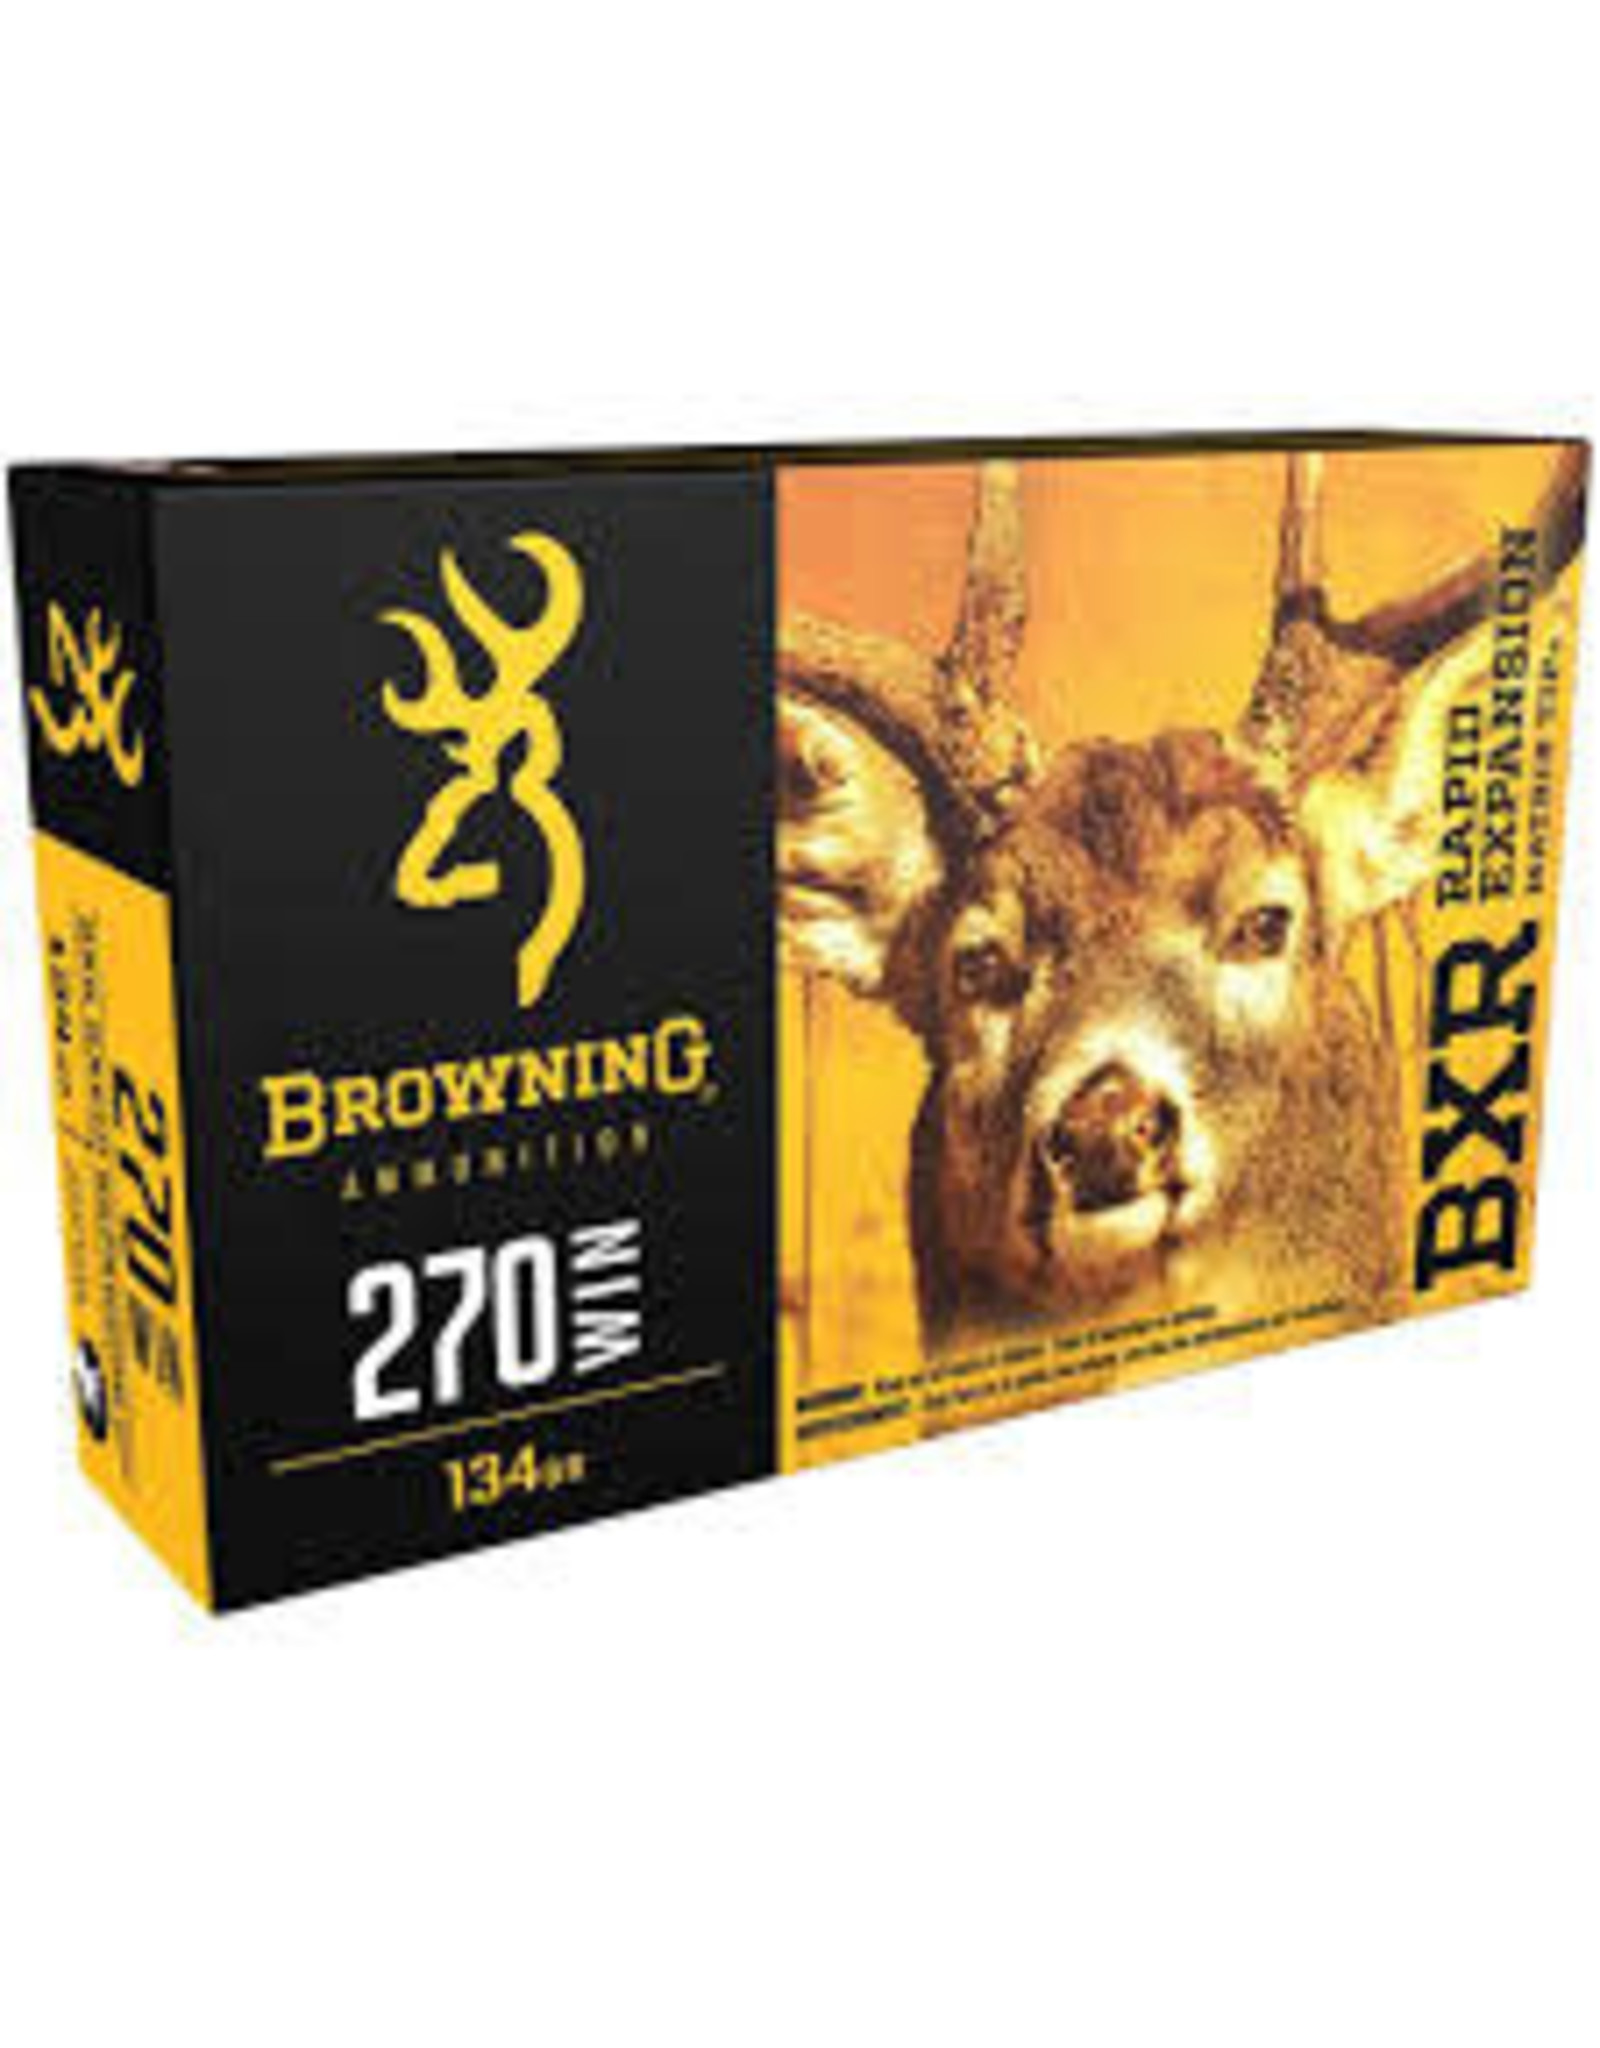 BROWNING BROWNING BXR